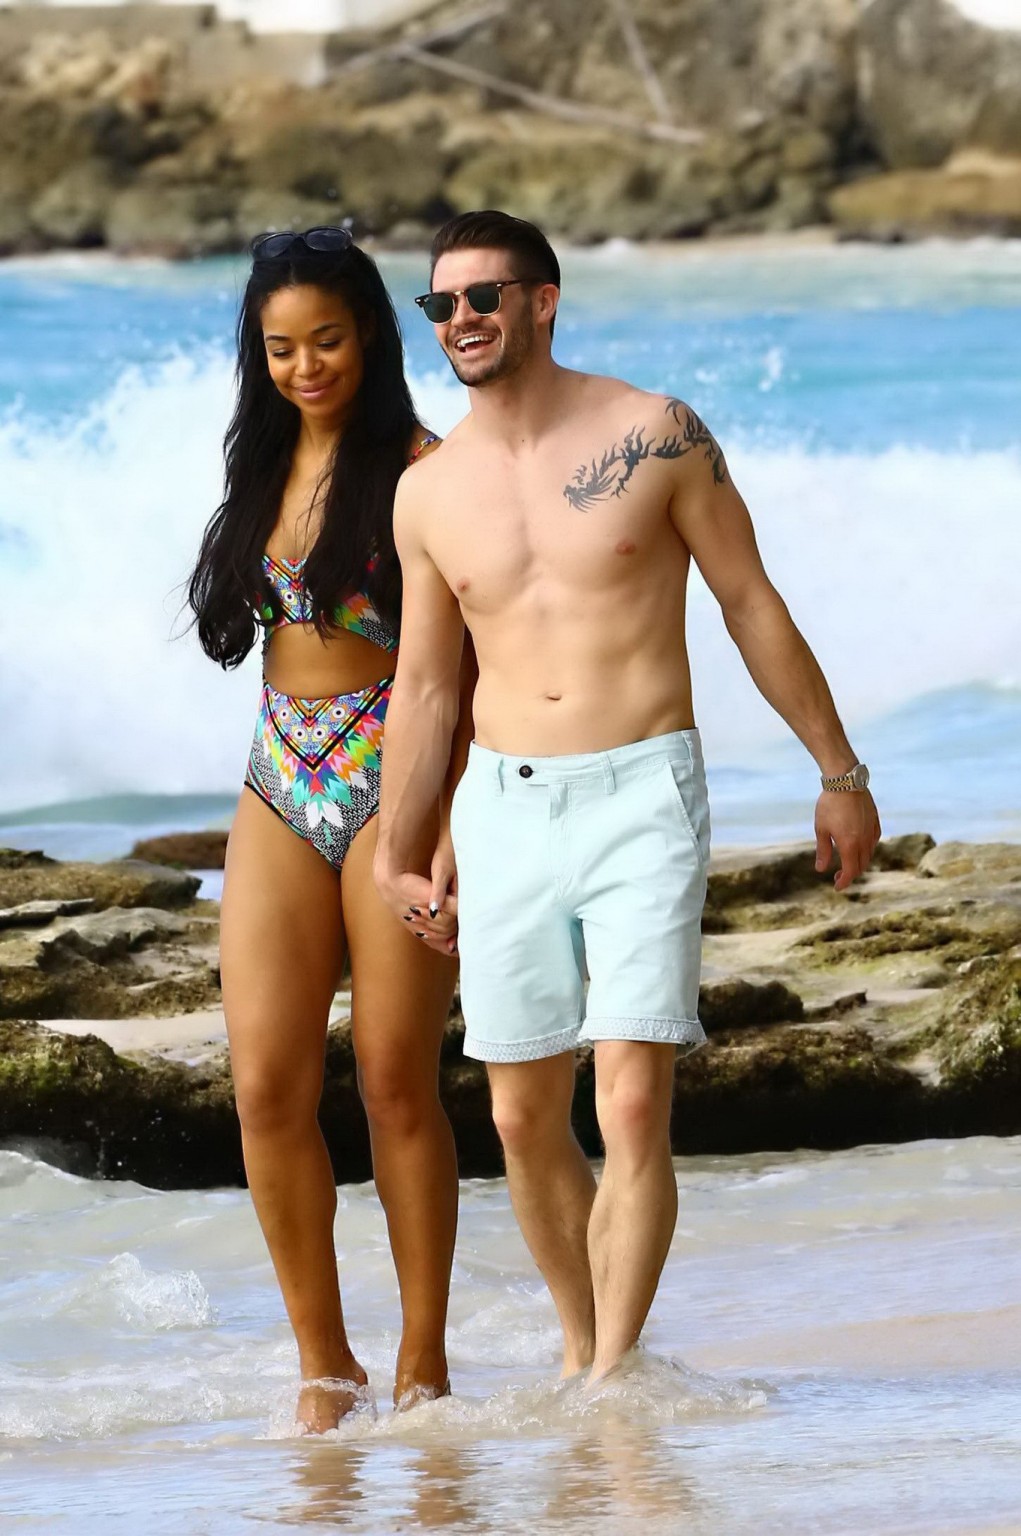 Sarah Jane Crawford shows off her seductive curves in a colorful swimsuit at the #75176826